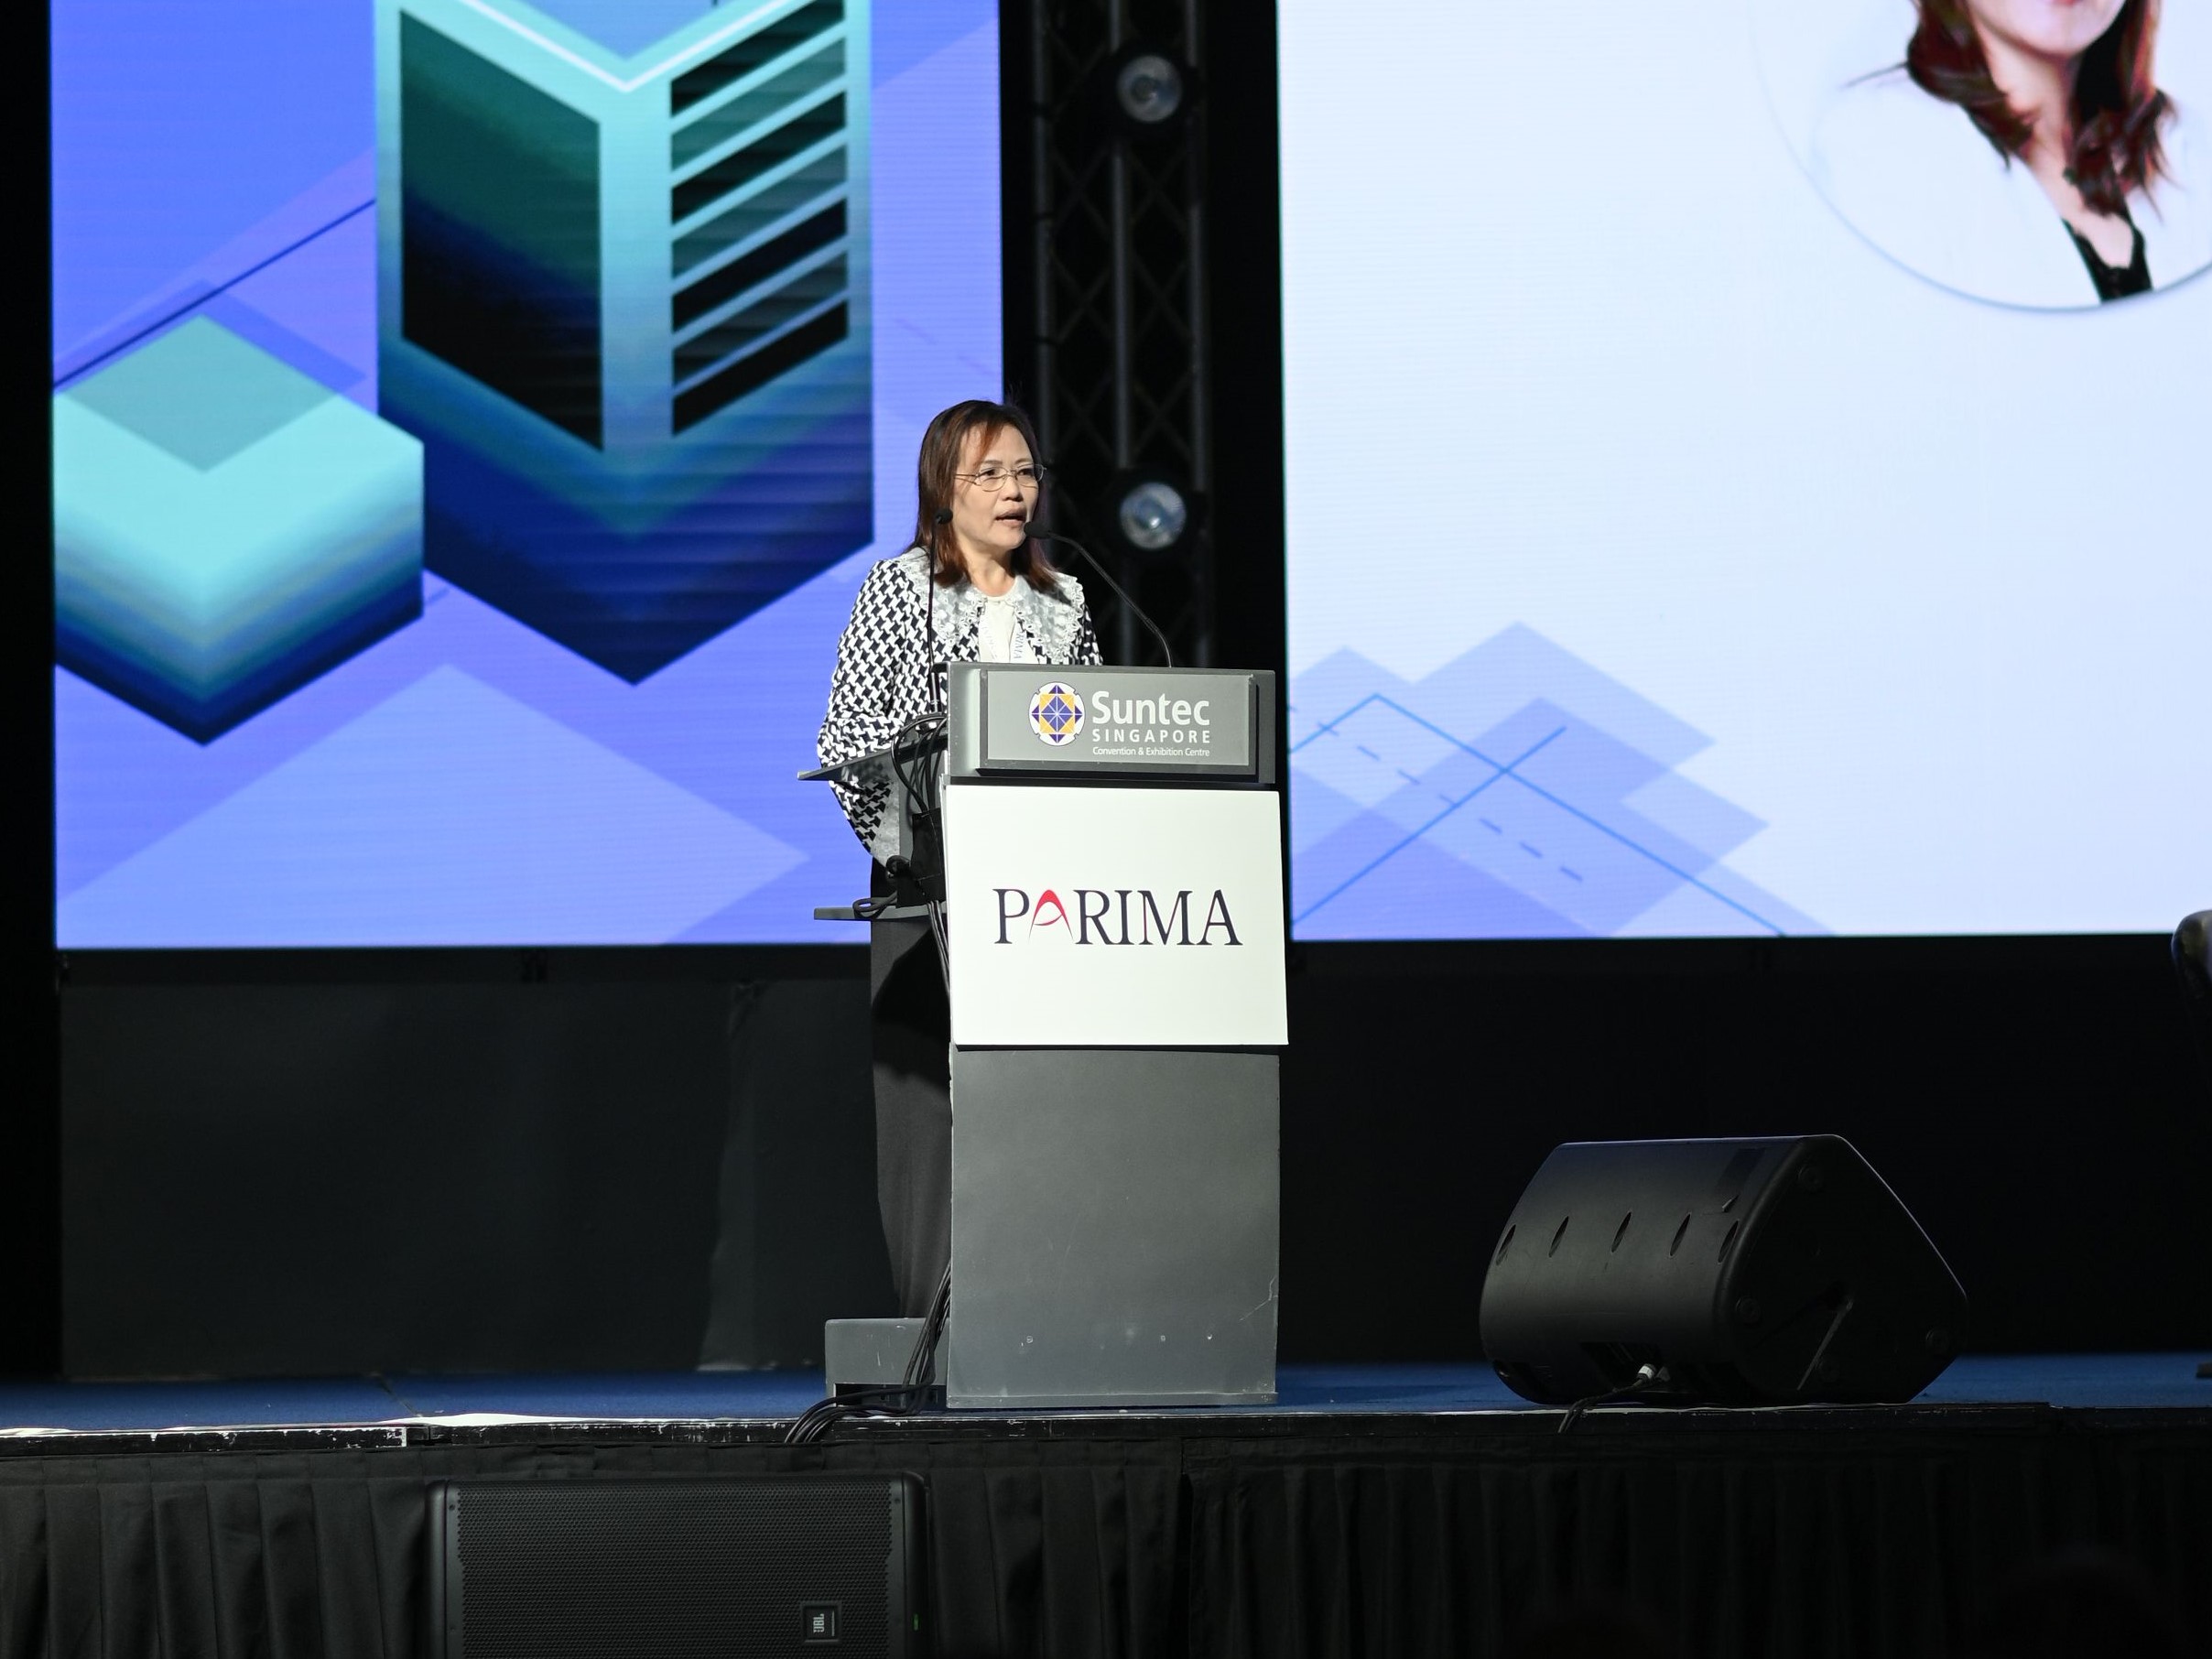 PARIMA Conference returns as in-person event in Singapore